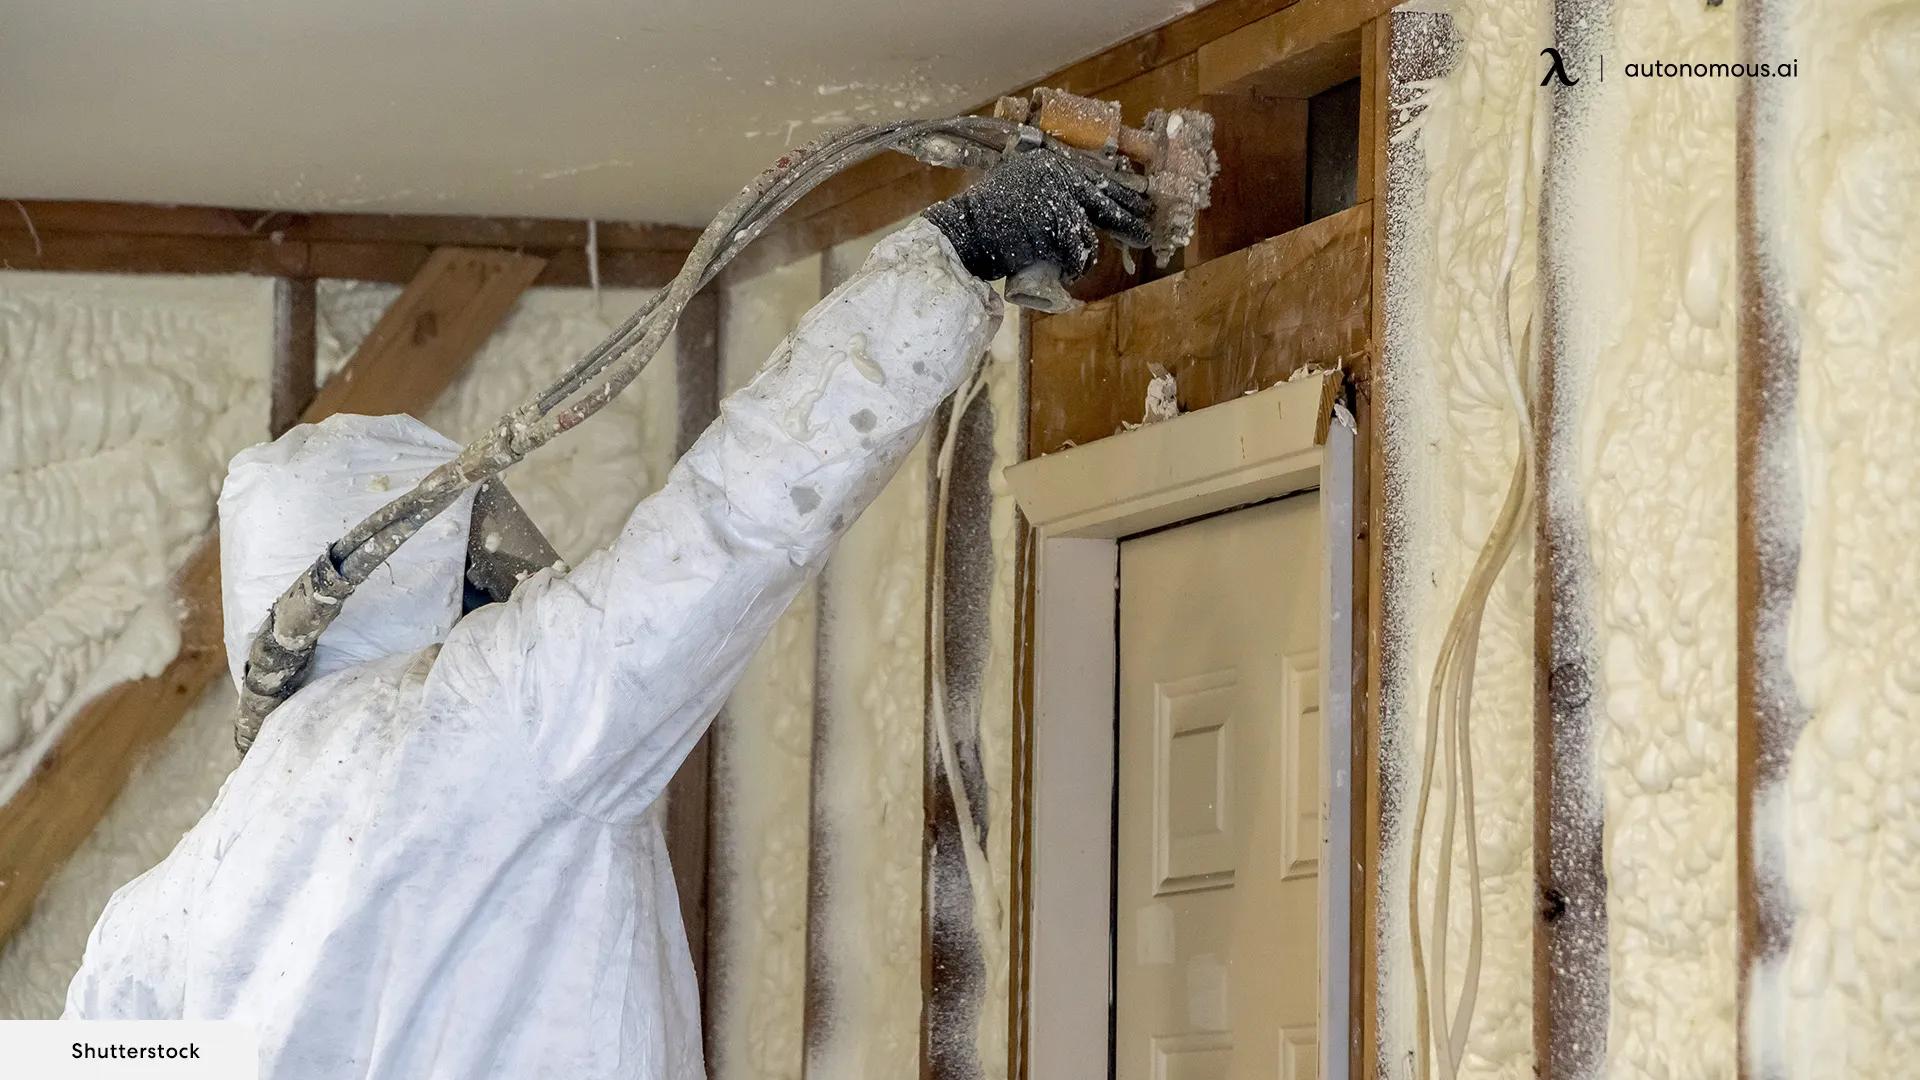 How Can Homeowners Remove Spray Foam Insulation?